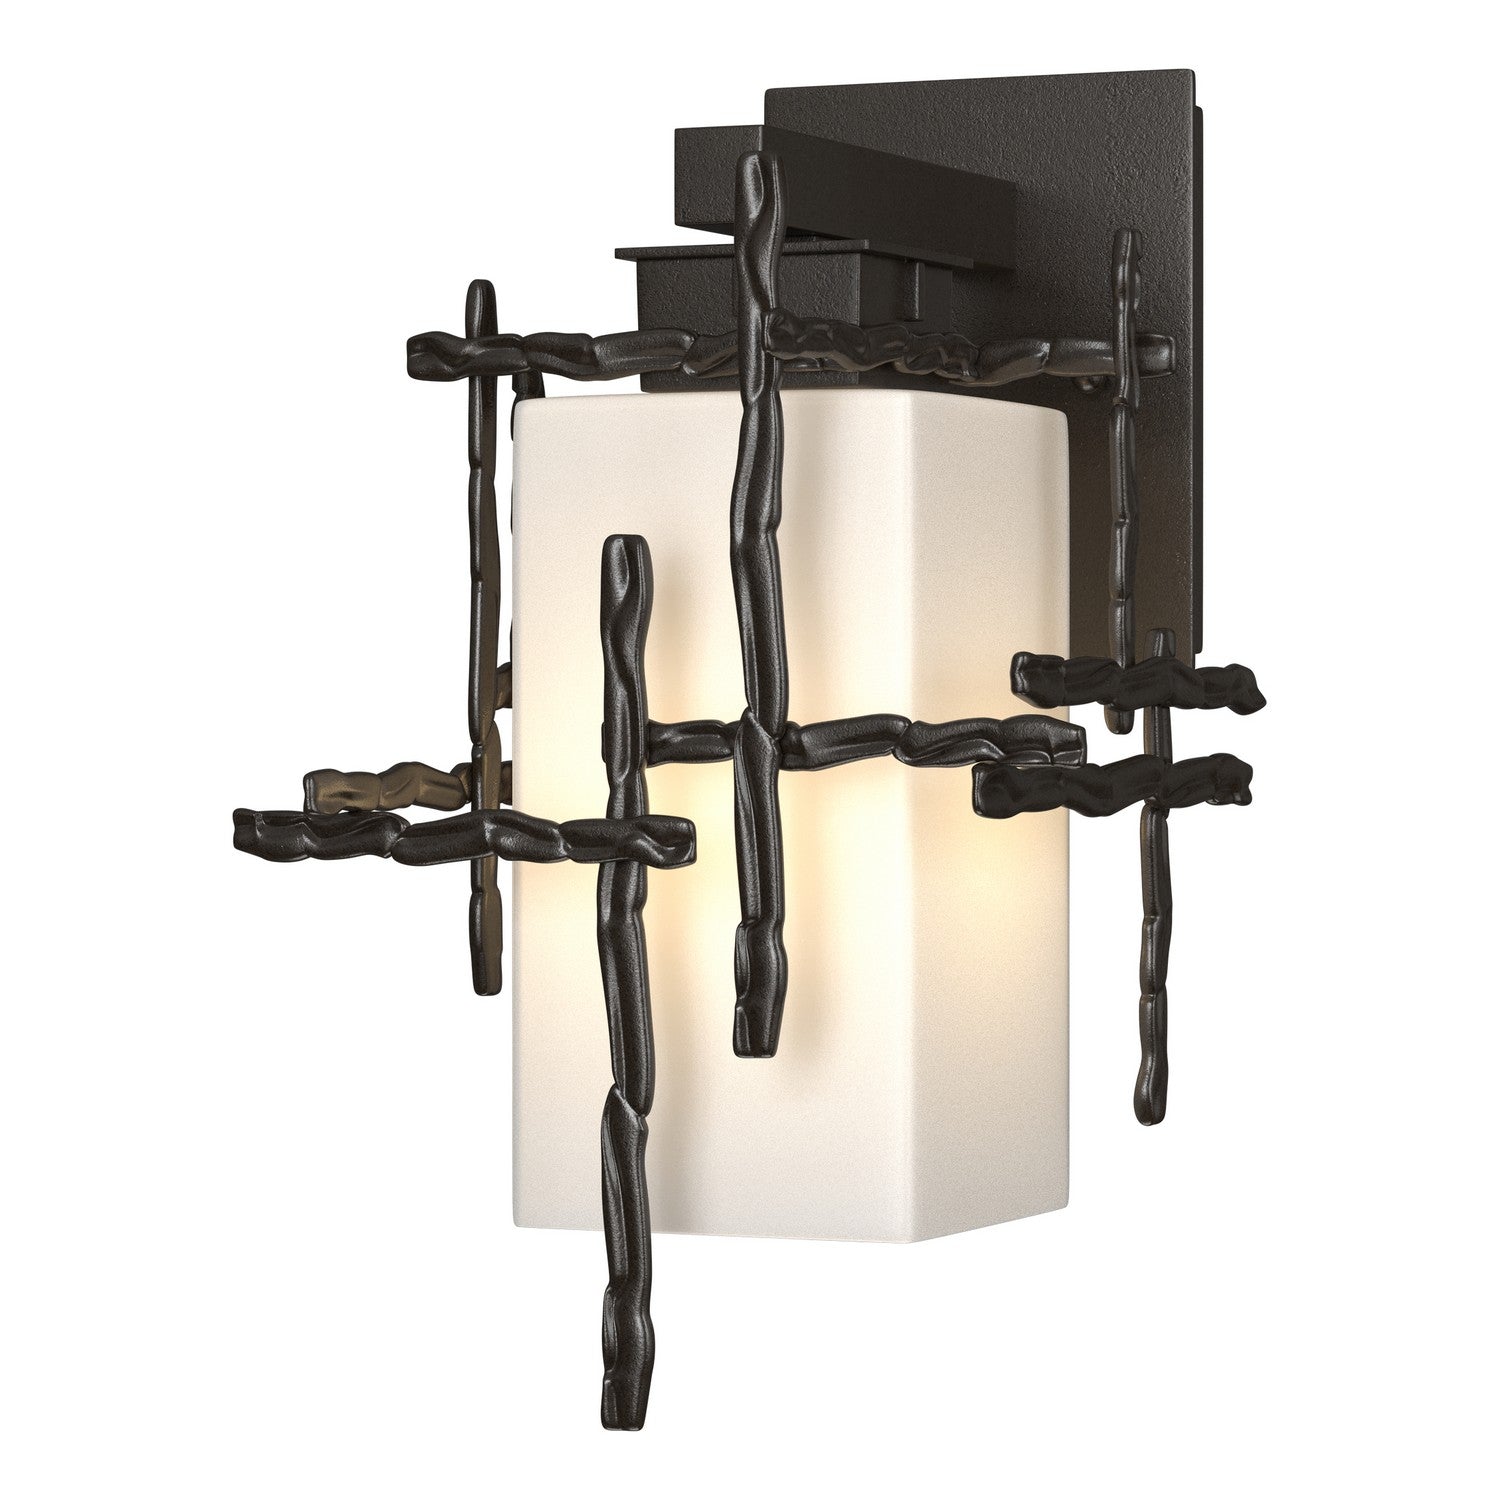 Hubbardton Forge - 302580-SKT-14-GG0111 - One Light Outdoor Wall Sconce - Tura - Coastal Oil Rubbed Bronze